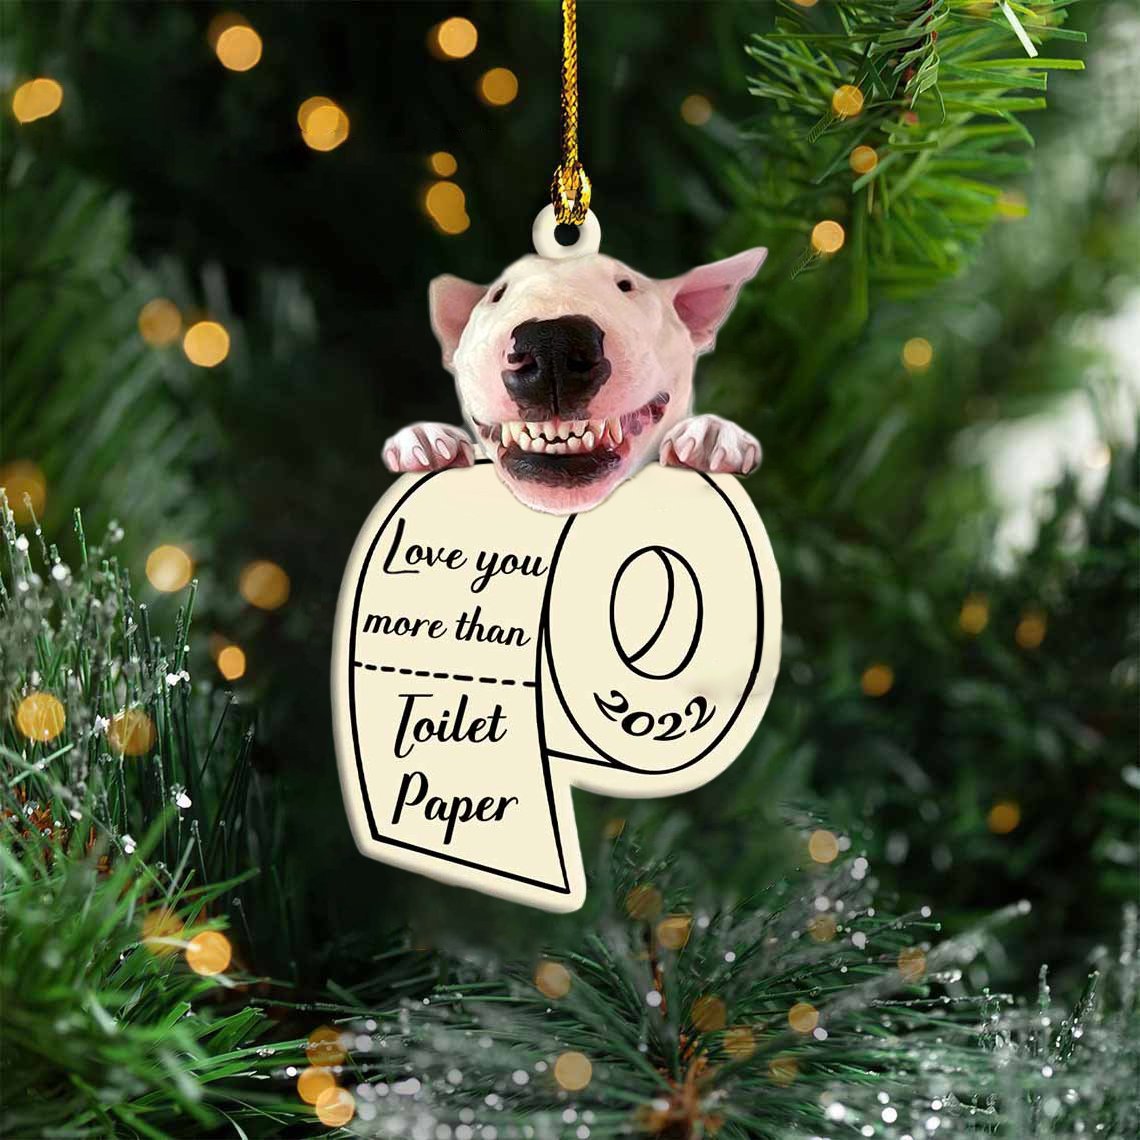 Bull Terrier Love You More Than Toilet Paper 2022 Hanging Ornament